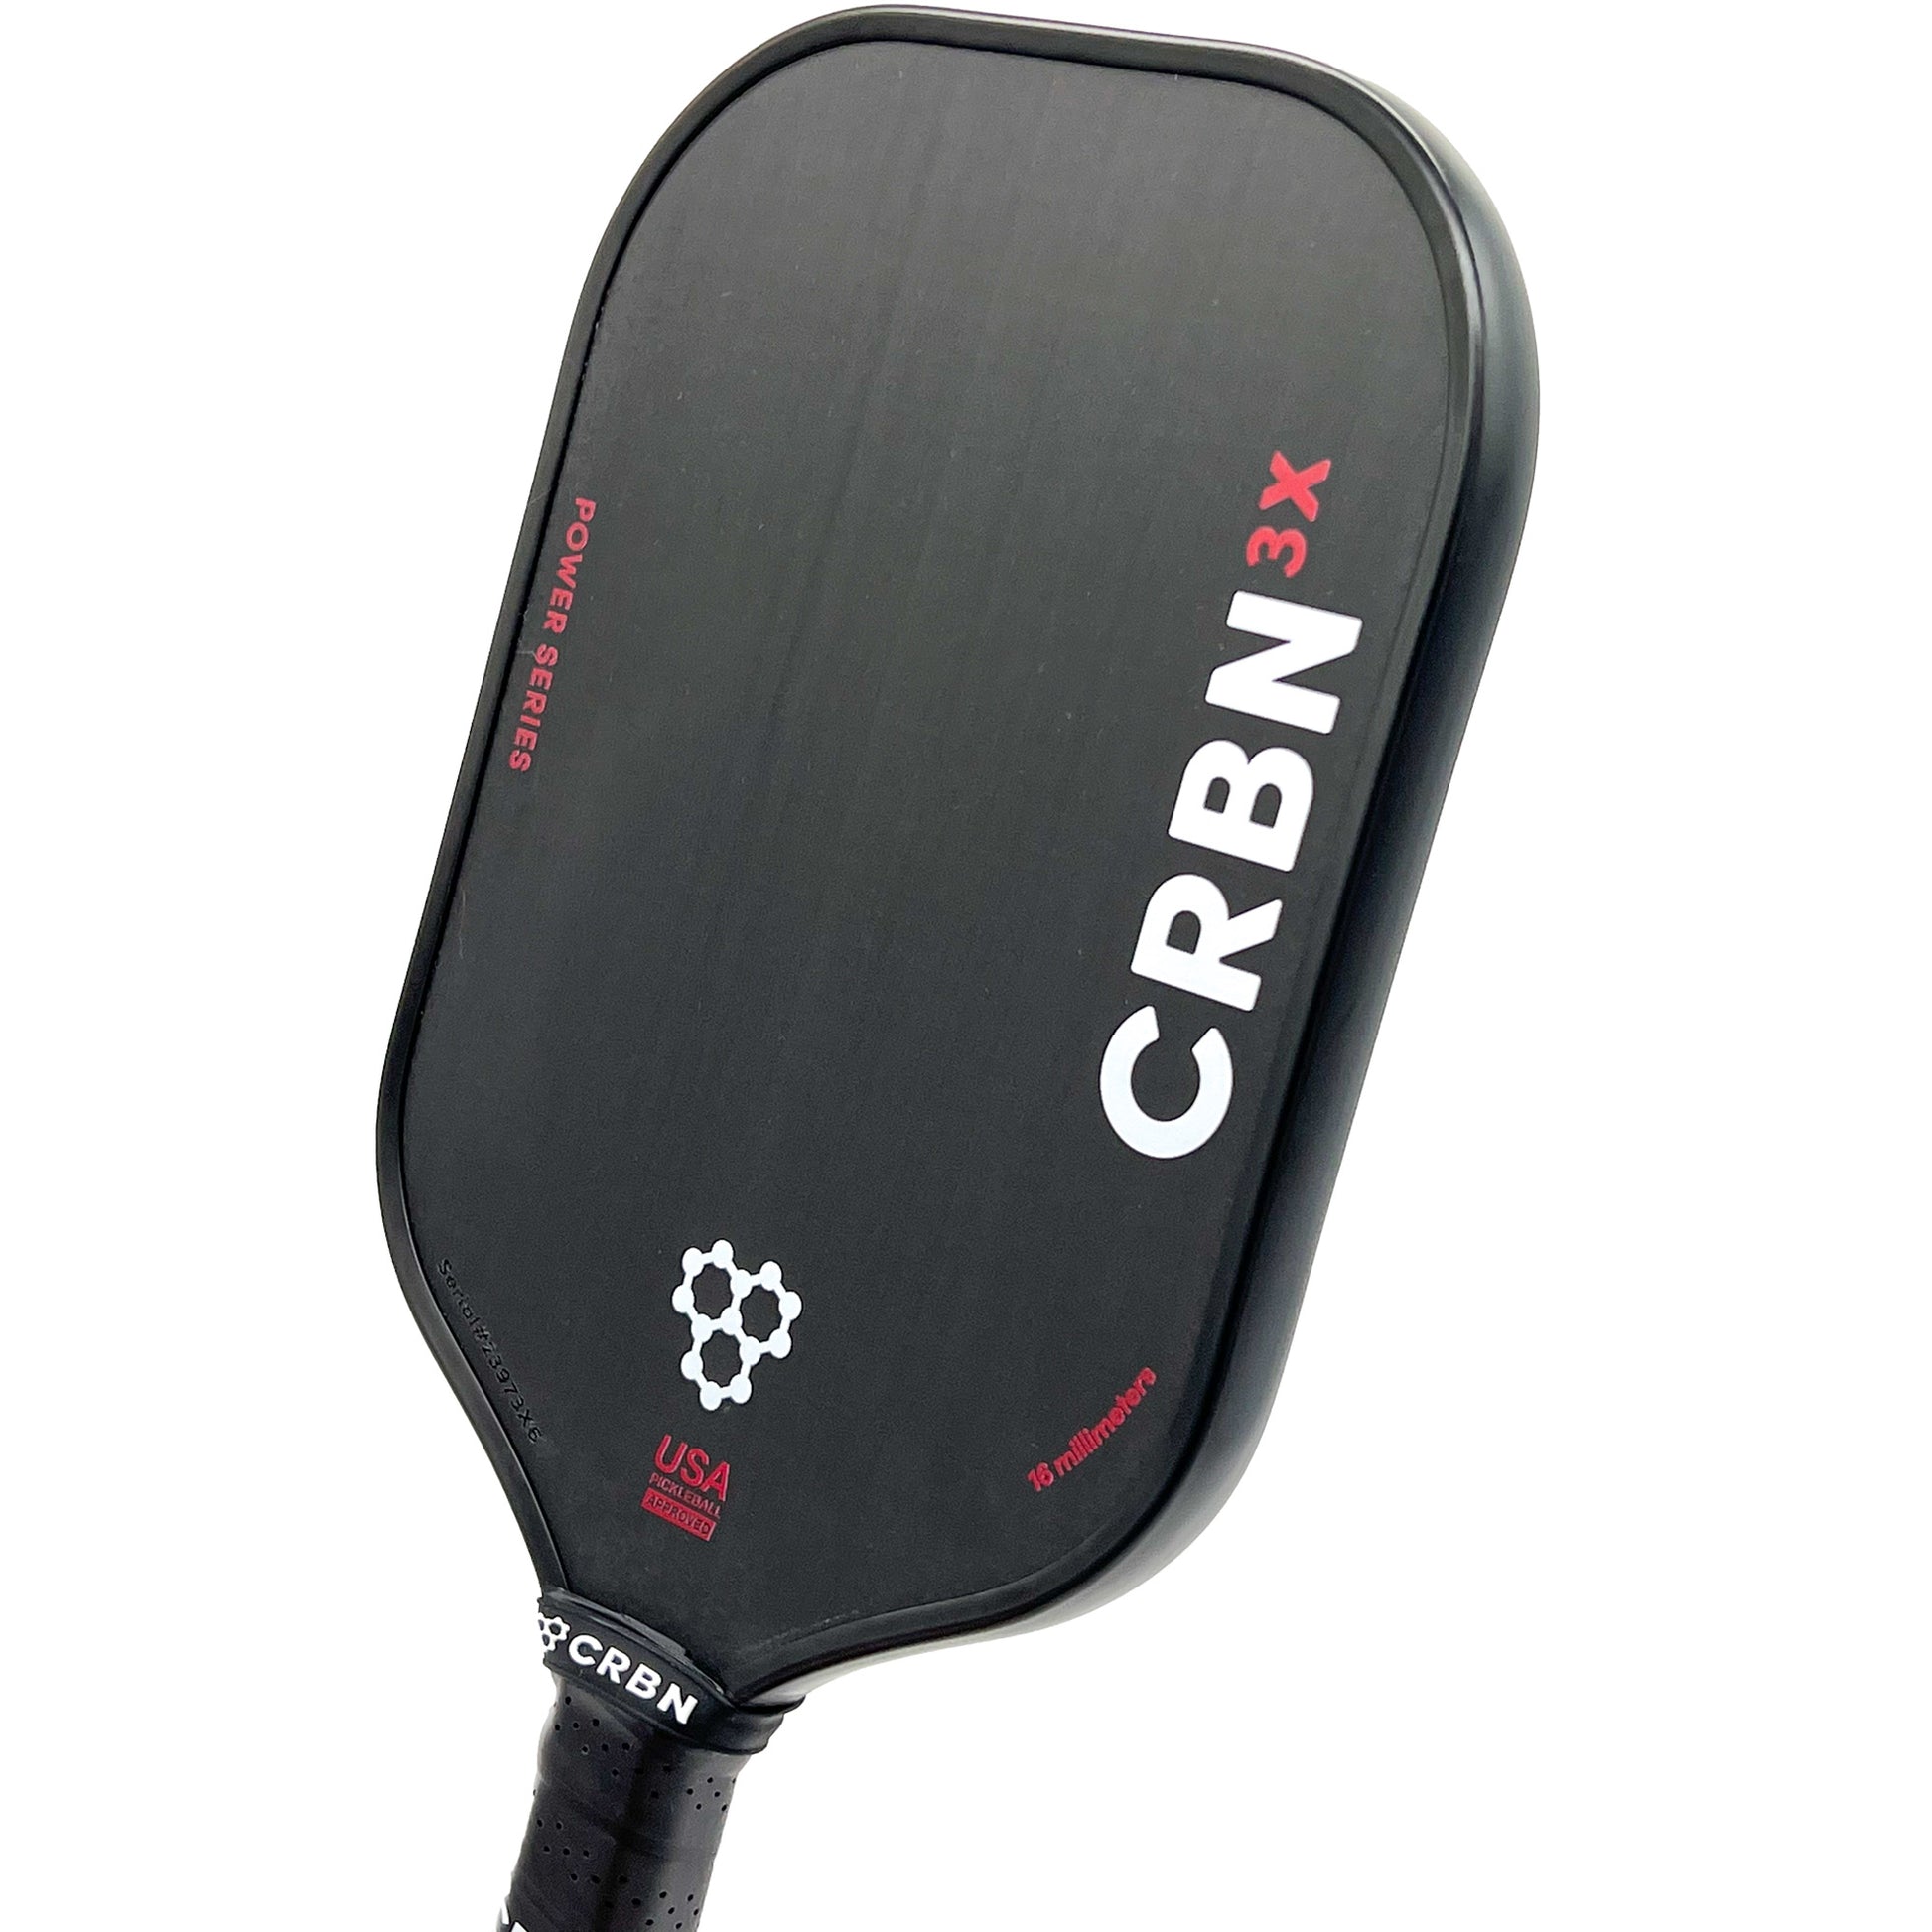 CRBN 3X Power Series Paddle.  One of the best paddles on the market and delivers superior performance for all players.